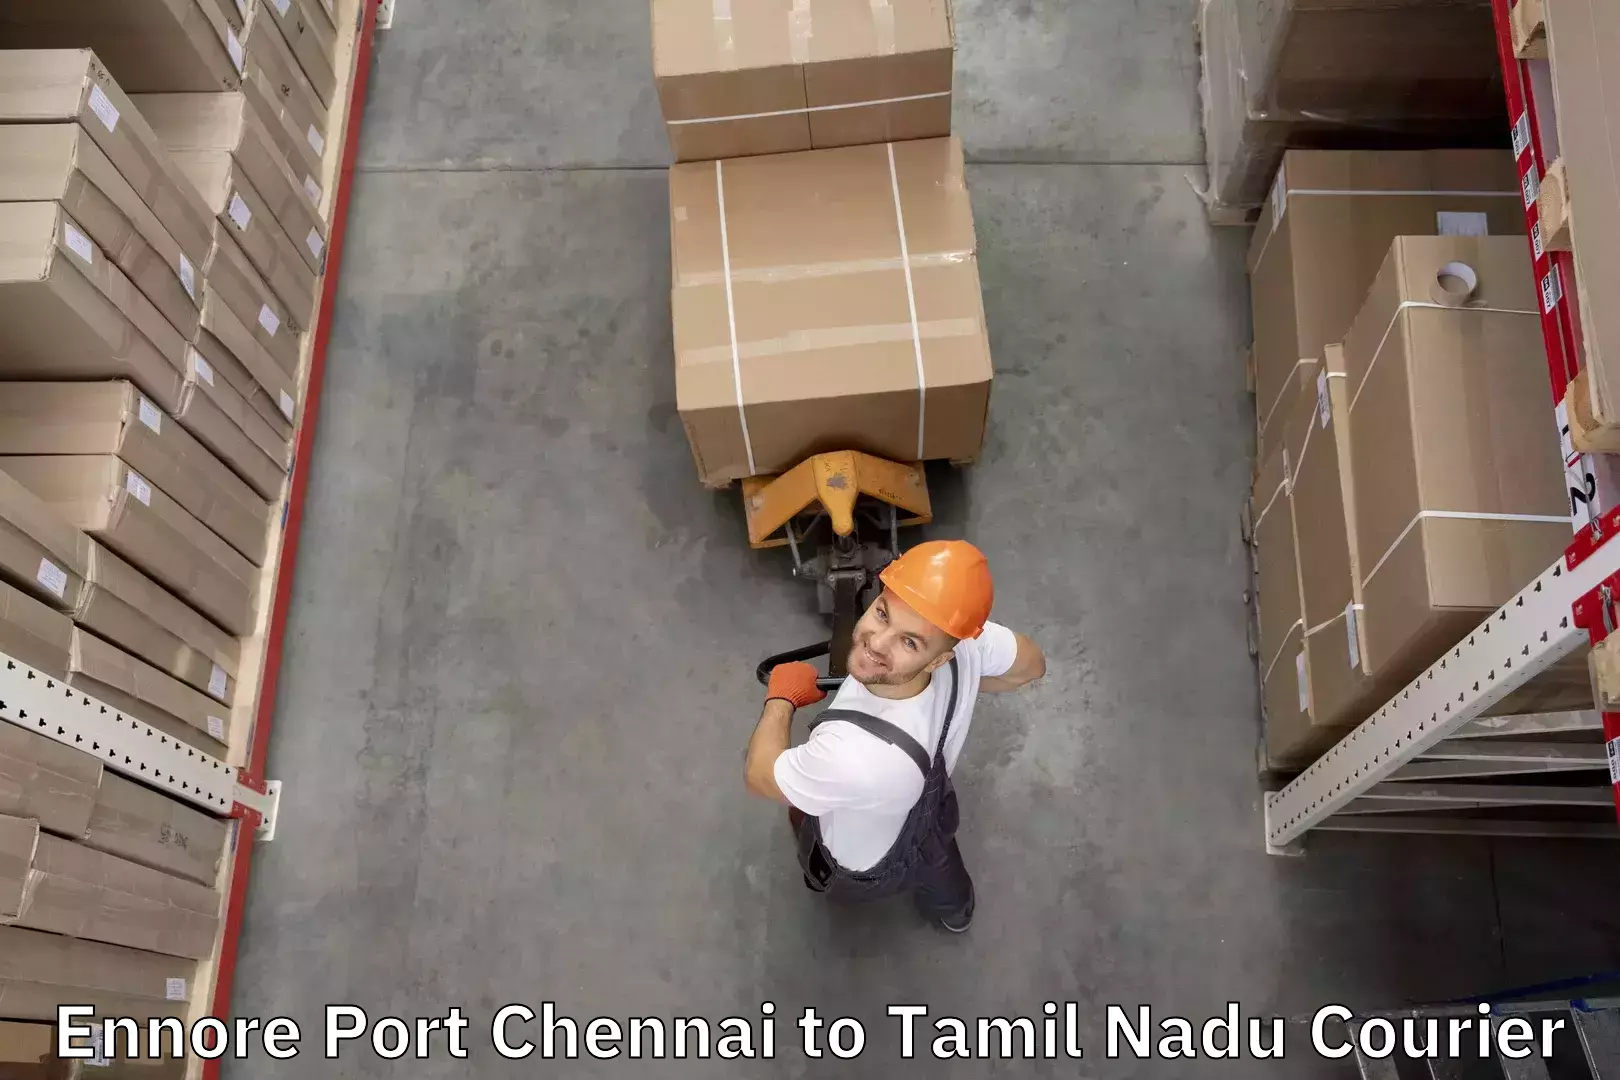 Baggage transport calculator in Ennore Port Chennai to Vriddhachalam